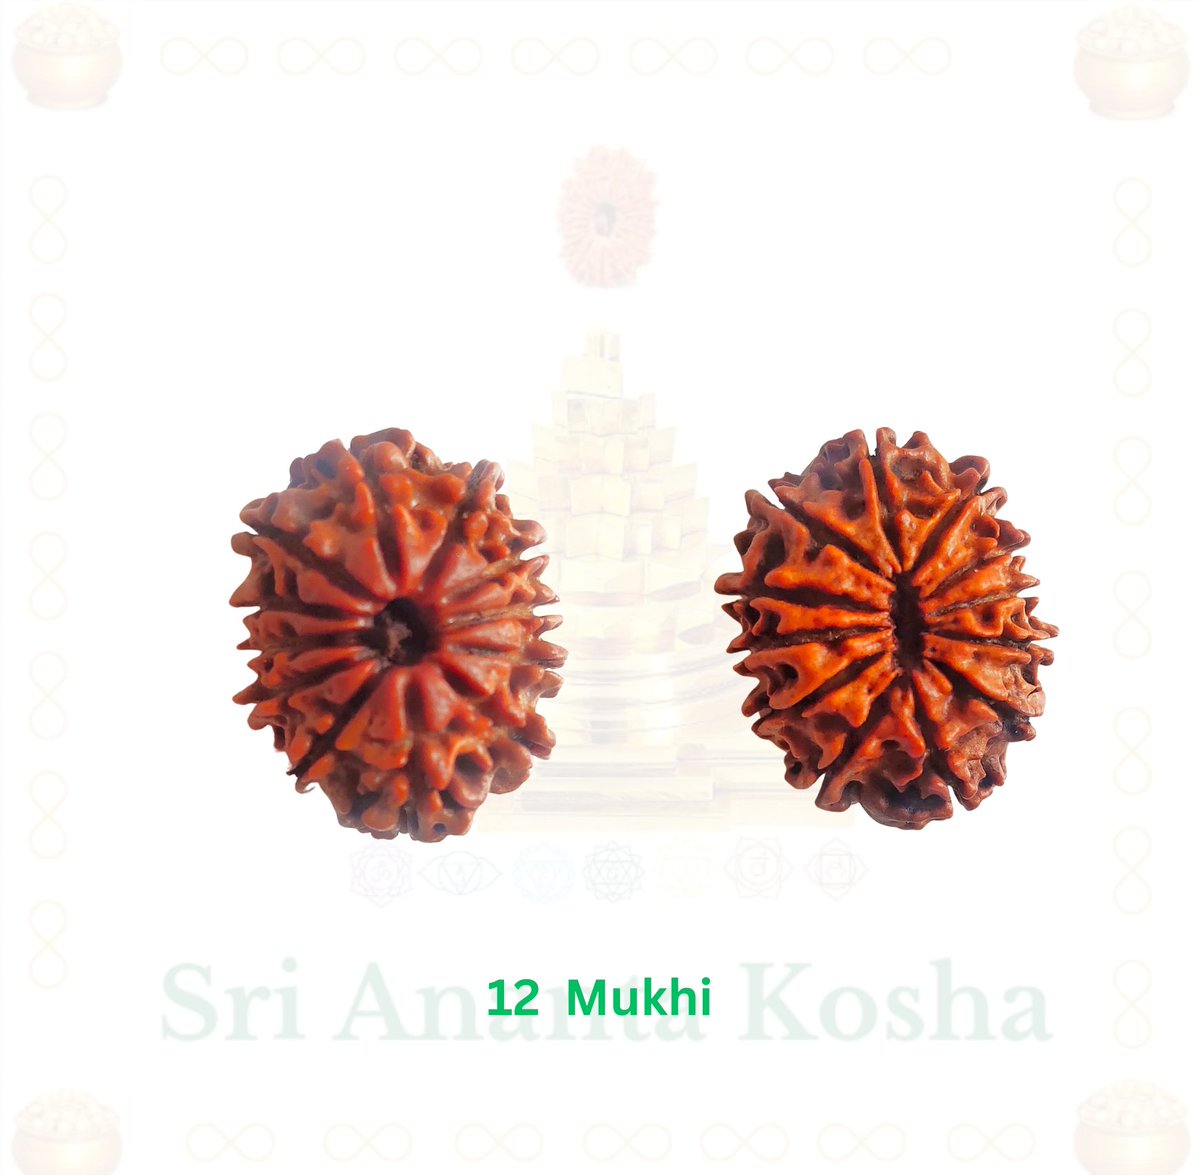 Jai ShivShakti 🙏

12 Mukhi Rudraksha:-

12 Mukhi represents the grace and radiance of Lord Surya

It blesses the wearer with brilliance, self-confidence leadership skills, name, fame, and success

It gives power to foresightedness and timely action 

Pacifies the negative and…